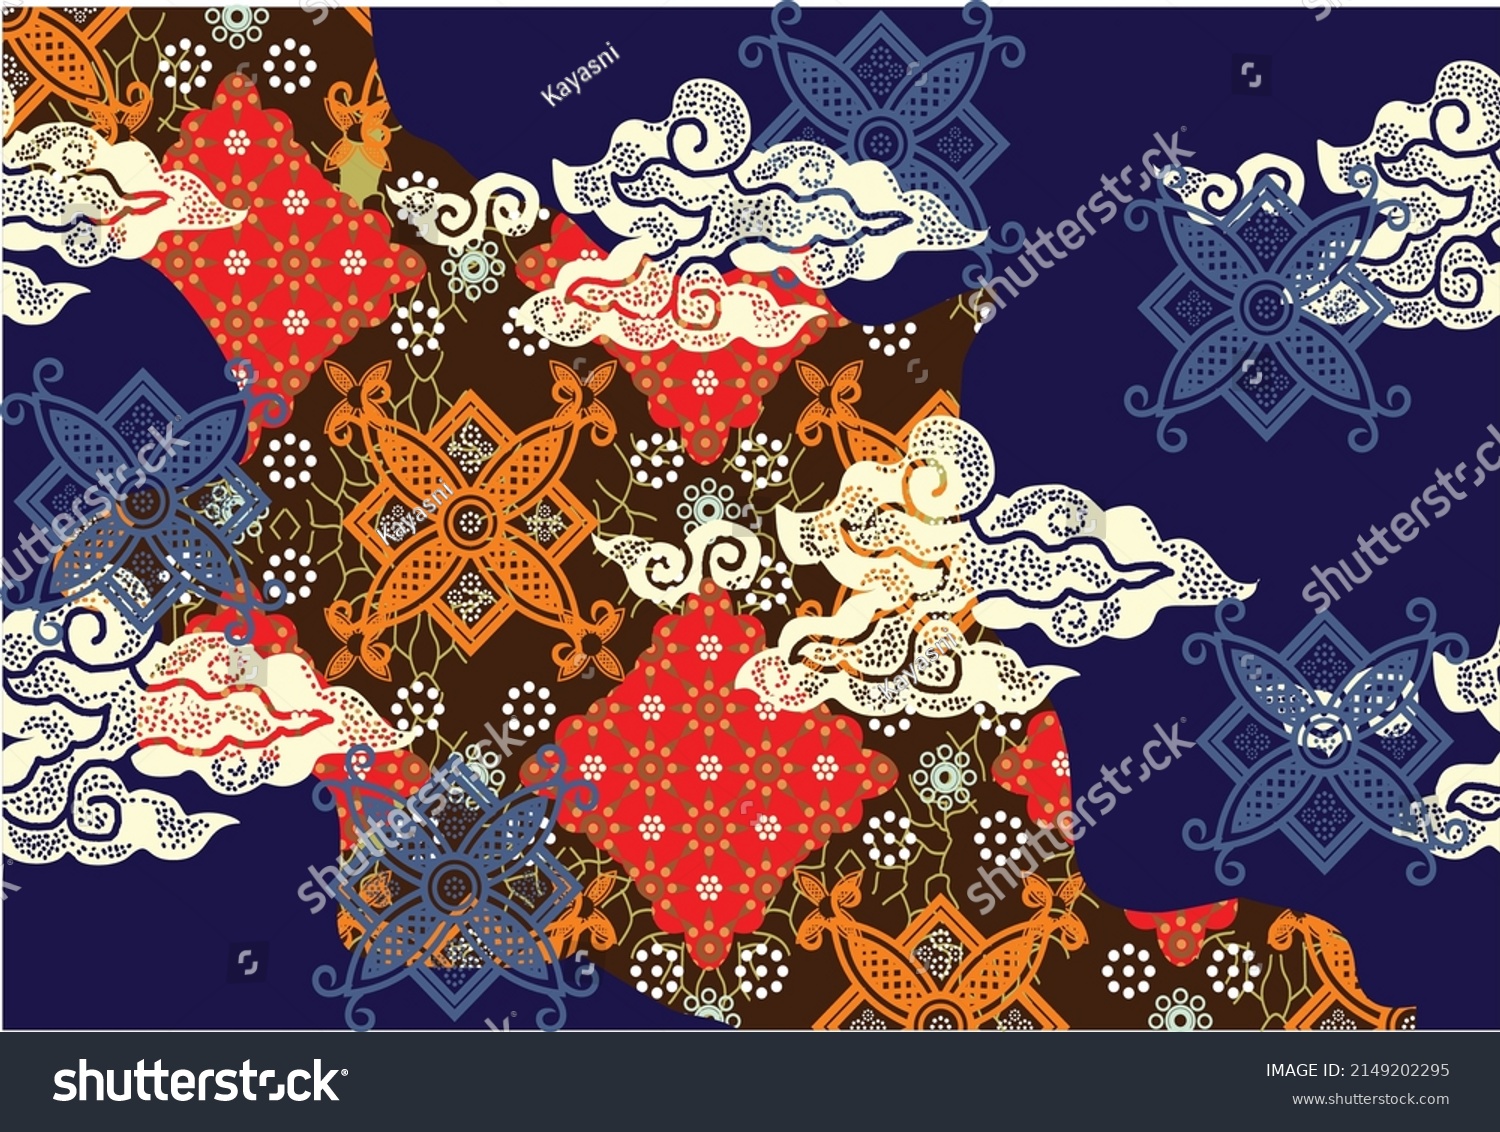 Motif Mega Mendung, batik motif typical of West Java Indonesia, curved line pattern with cloud objects, with developments and various artistic colors #2149202295